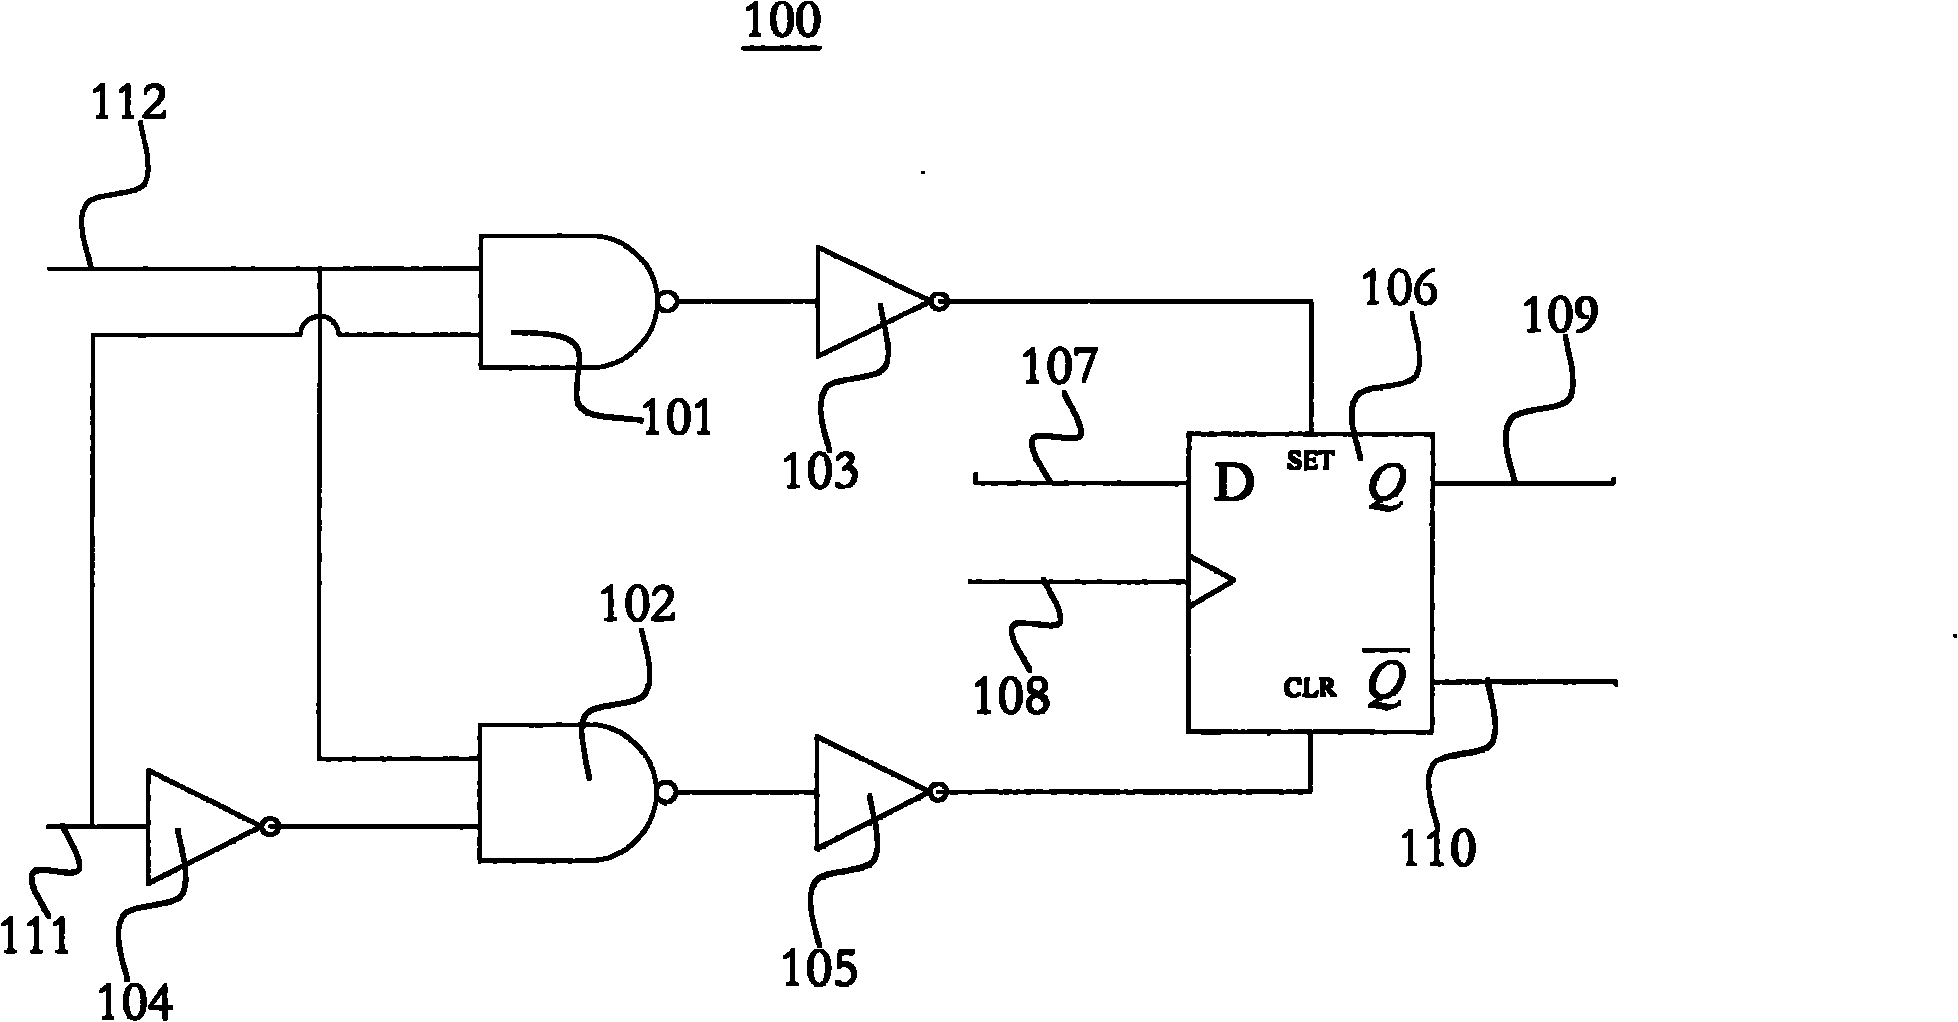 D-type flip-flop unit and frequency divider with the same